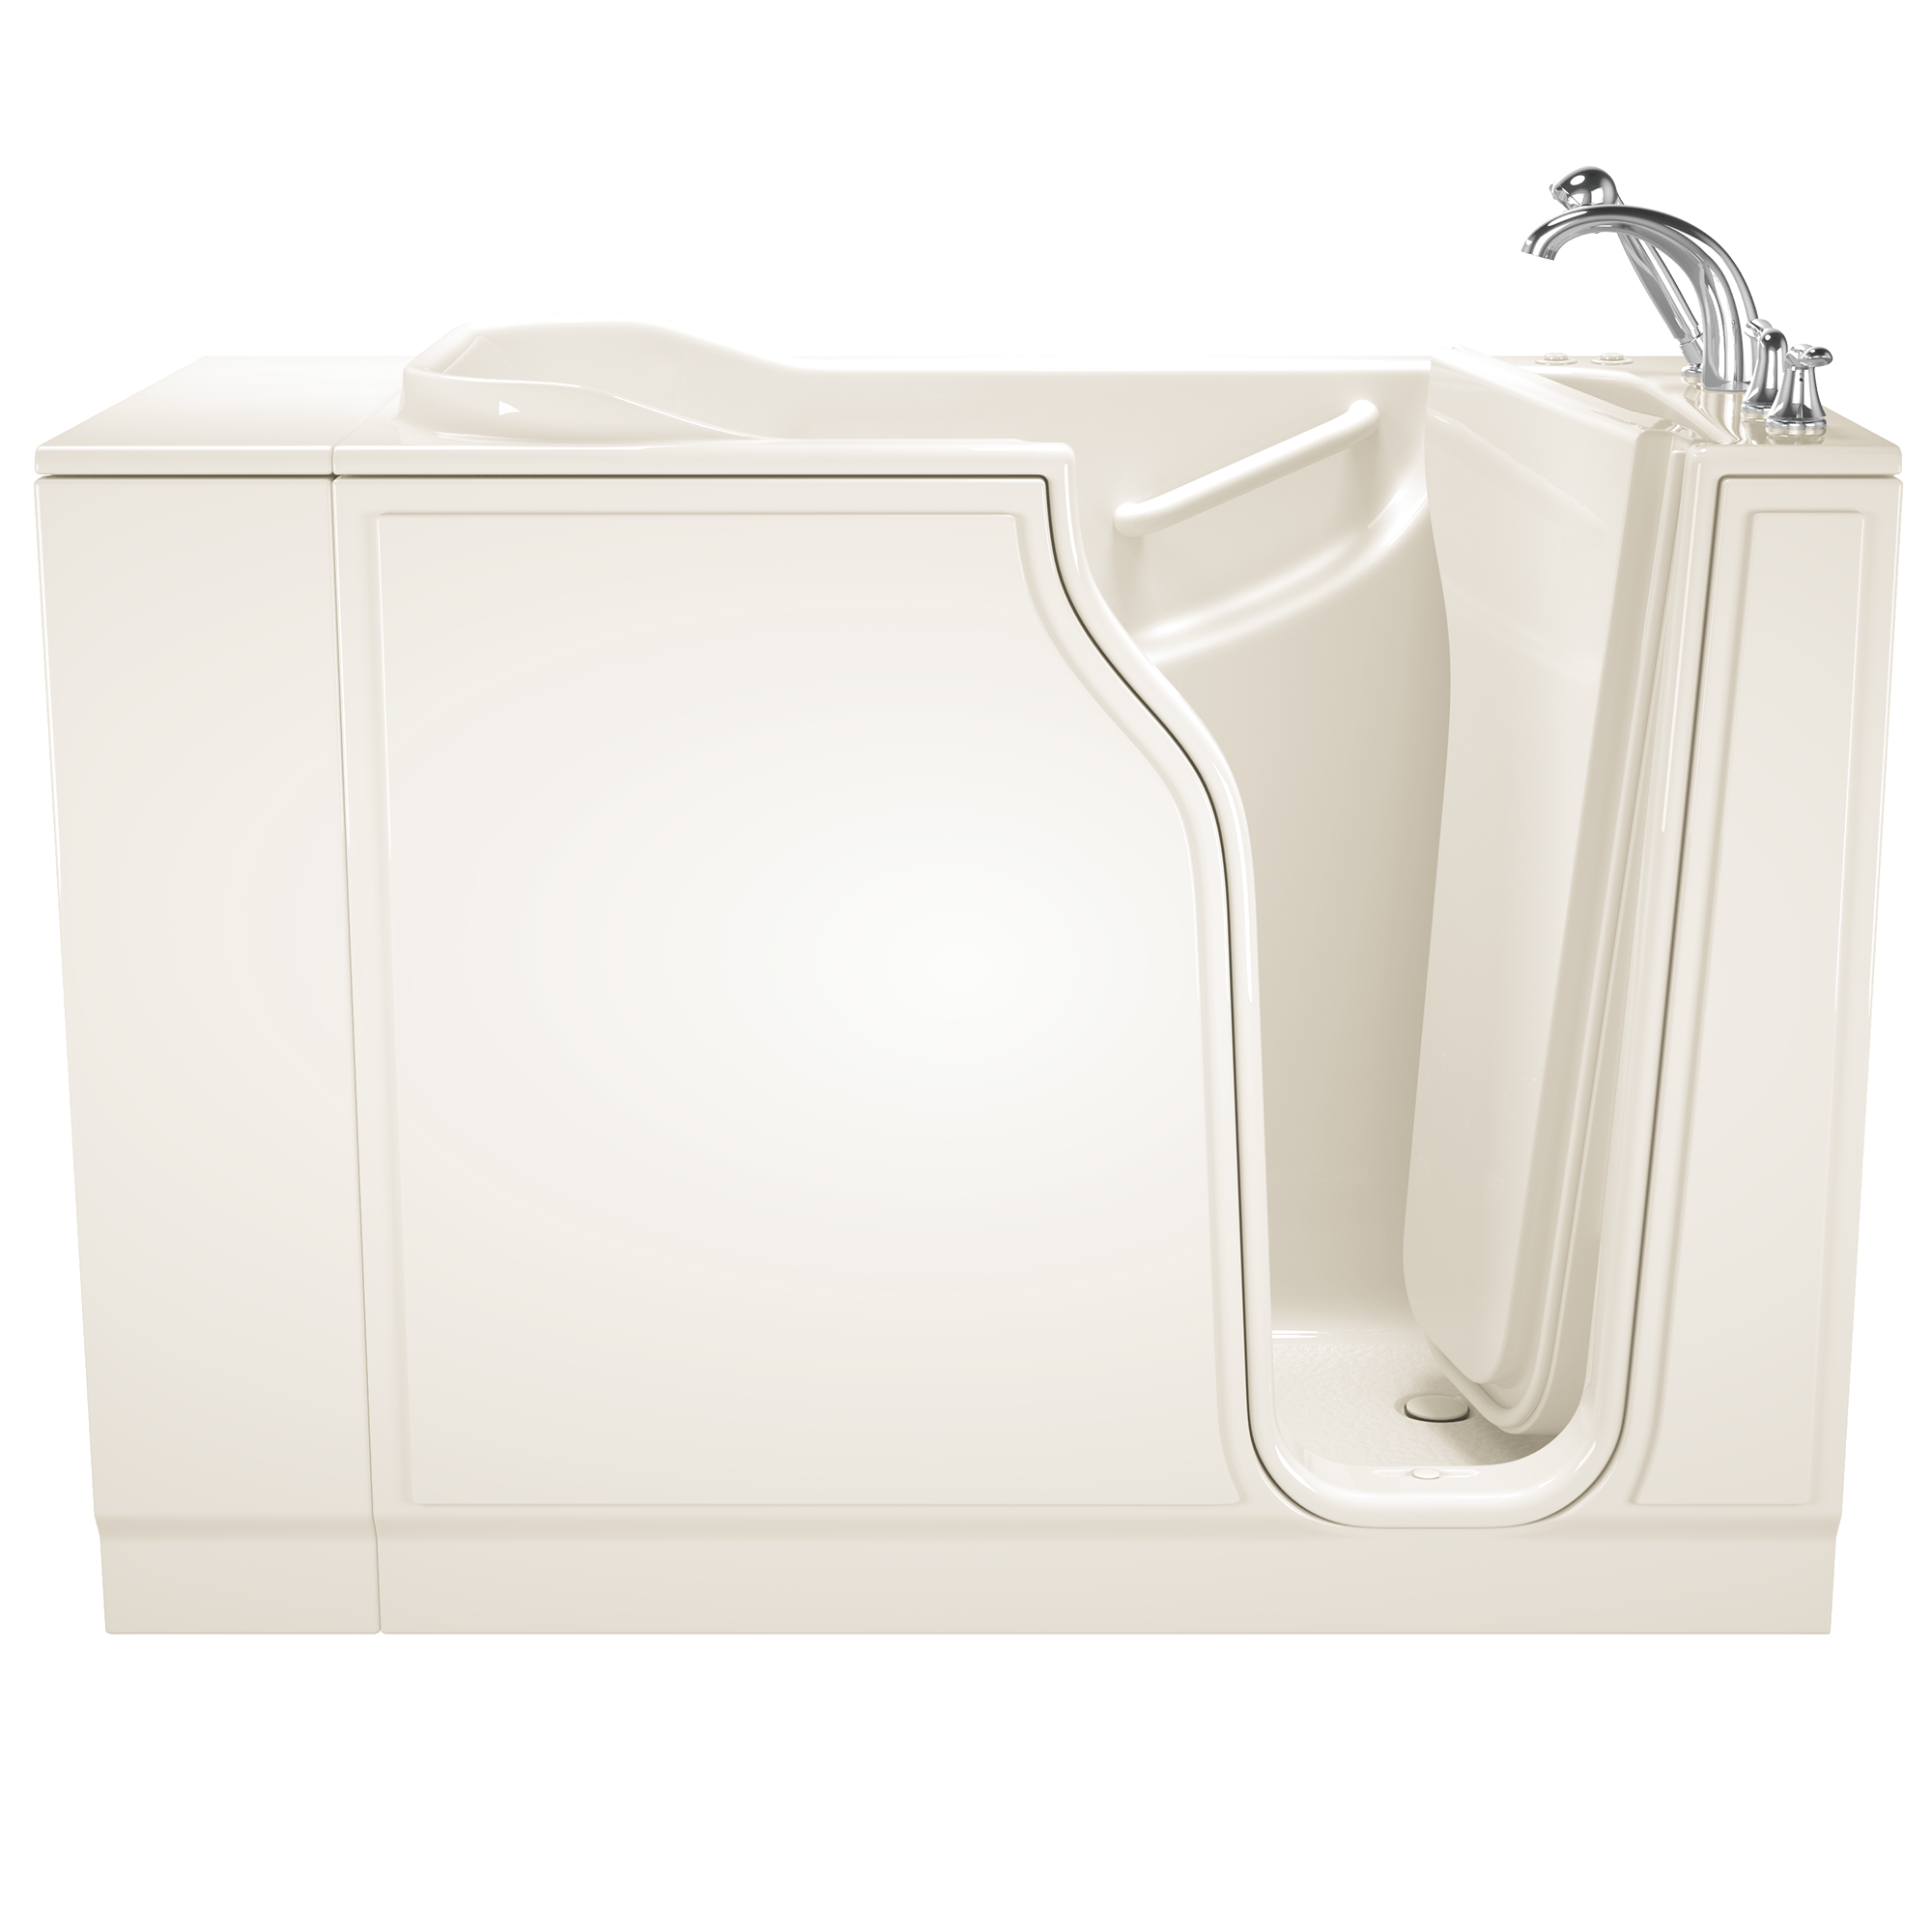 Gelcoat Entry Series 52 x 30-Inch Walk-In Tub With Combination Air Spa and Whirlpool Systems – Right-Hand Drain With Faucet